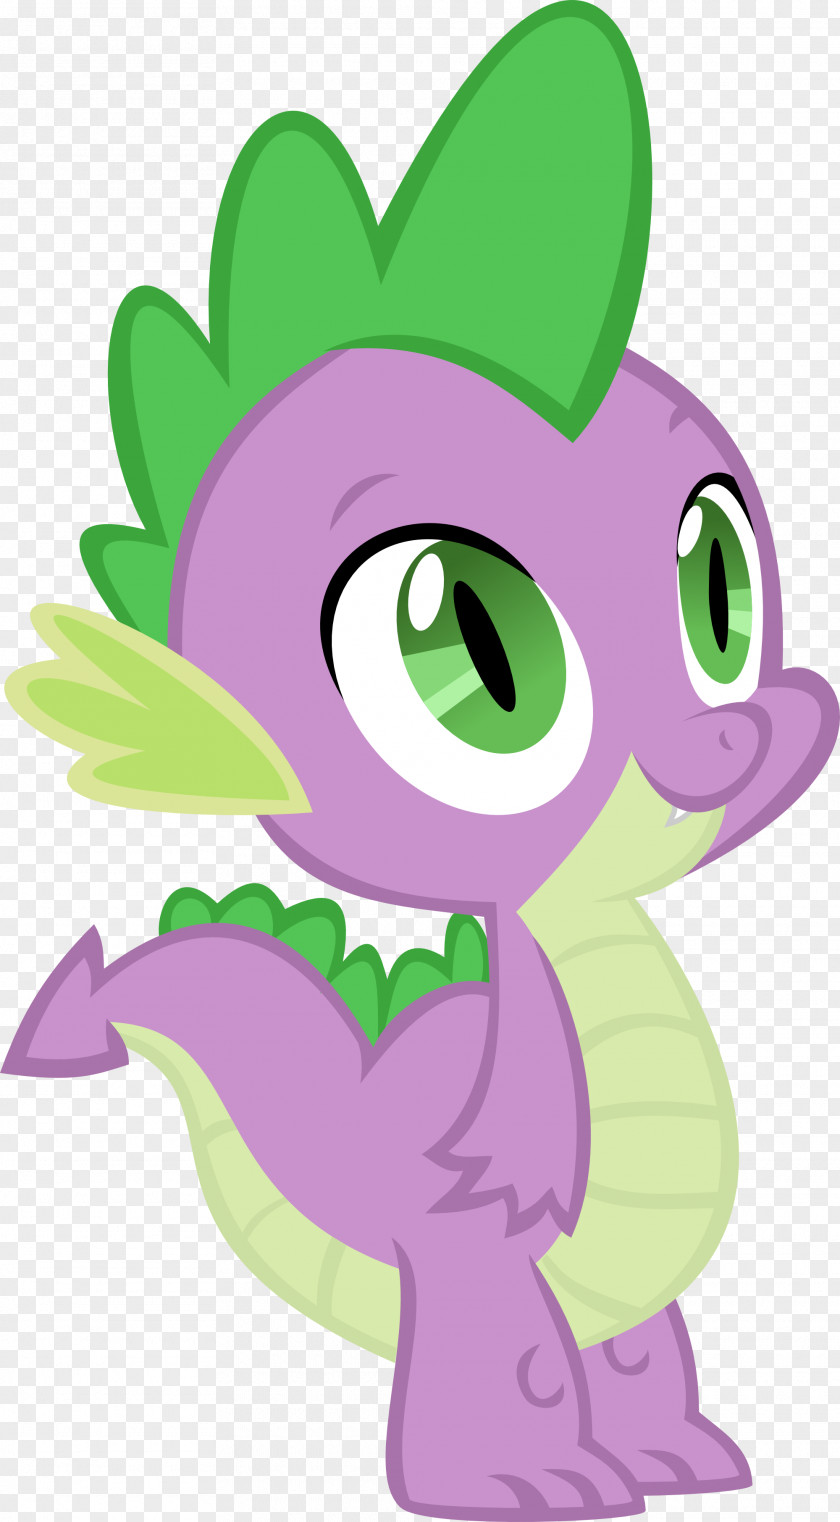 Spike My Little Pony Twilight Sparkle Rarity PNG